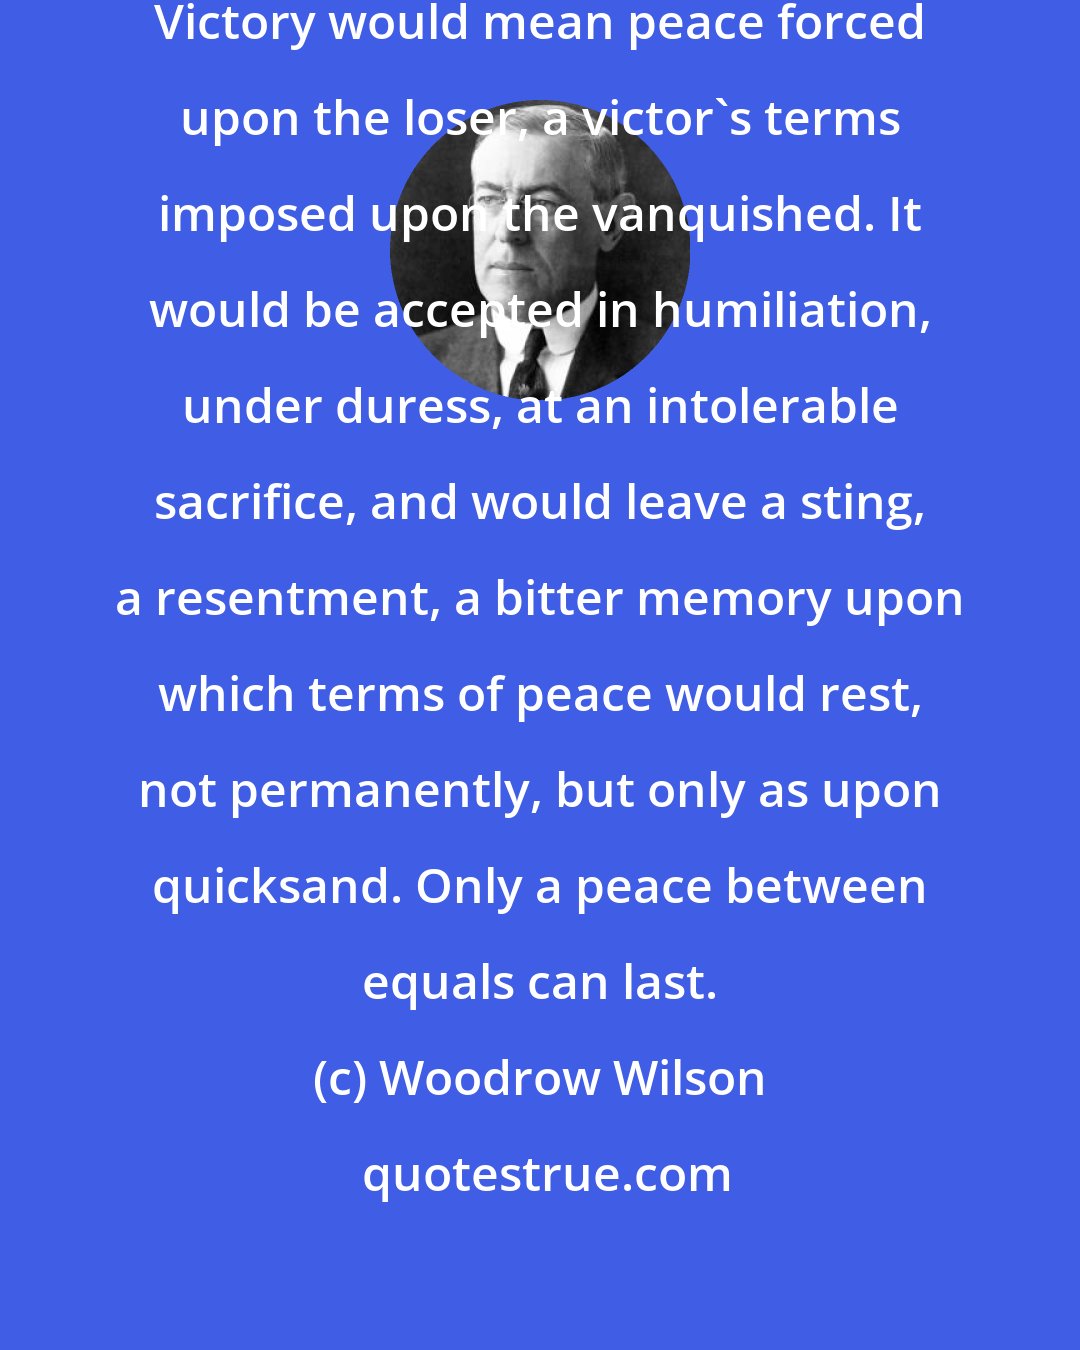 Woodrow Wilson: It must be a peace without victory... Victory would mean peace forced upon the loser, a victor's terms imposed upon the vanquished. It would be accepted in humiliation, under duress, at an intolerable sacrifice, and would leave a sting, a resentment, a bitter memory upon which terms of peace would rest, not permanently, but only as upon quicksand. Only a peace between equals can last.